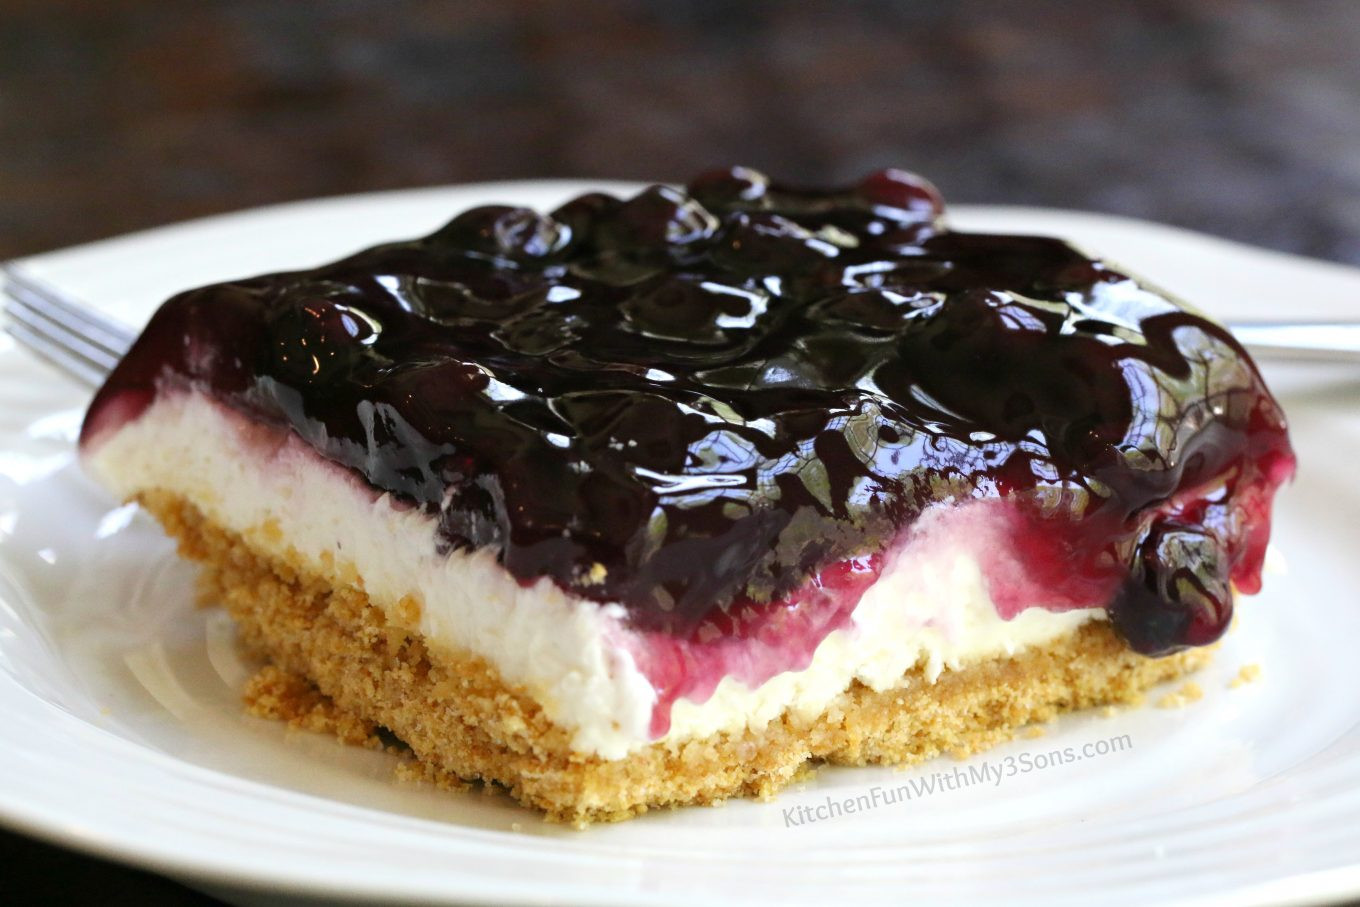 Blueberry Dessert Recipes With Cream Cheese
 Lemon Blueberry Cheesecake Dessert Kitchen Fun With My 3